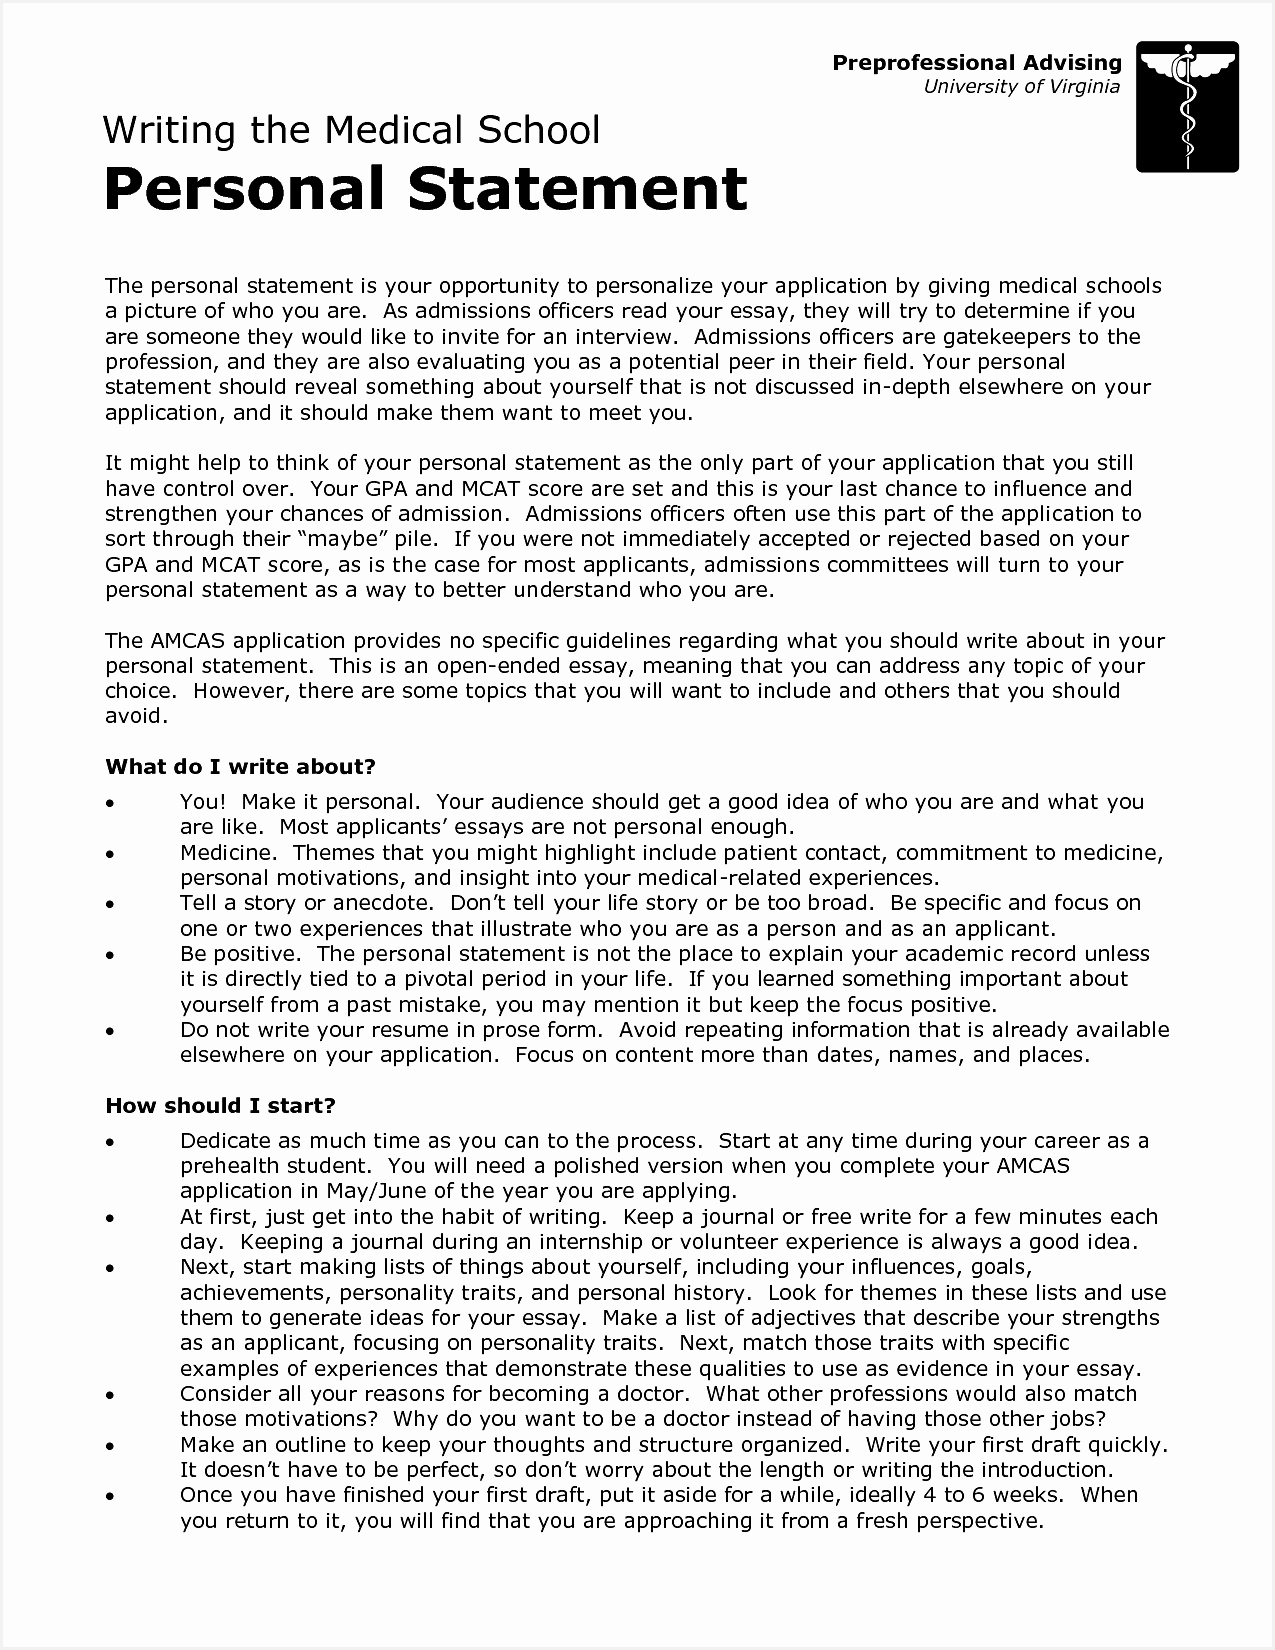 how to start a personal statement for a cv